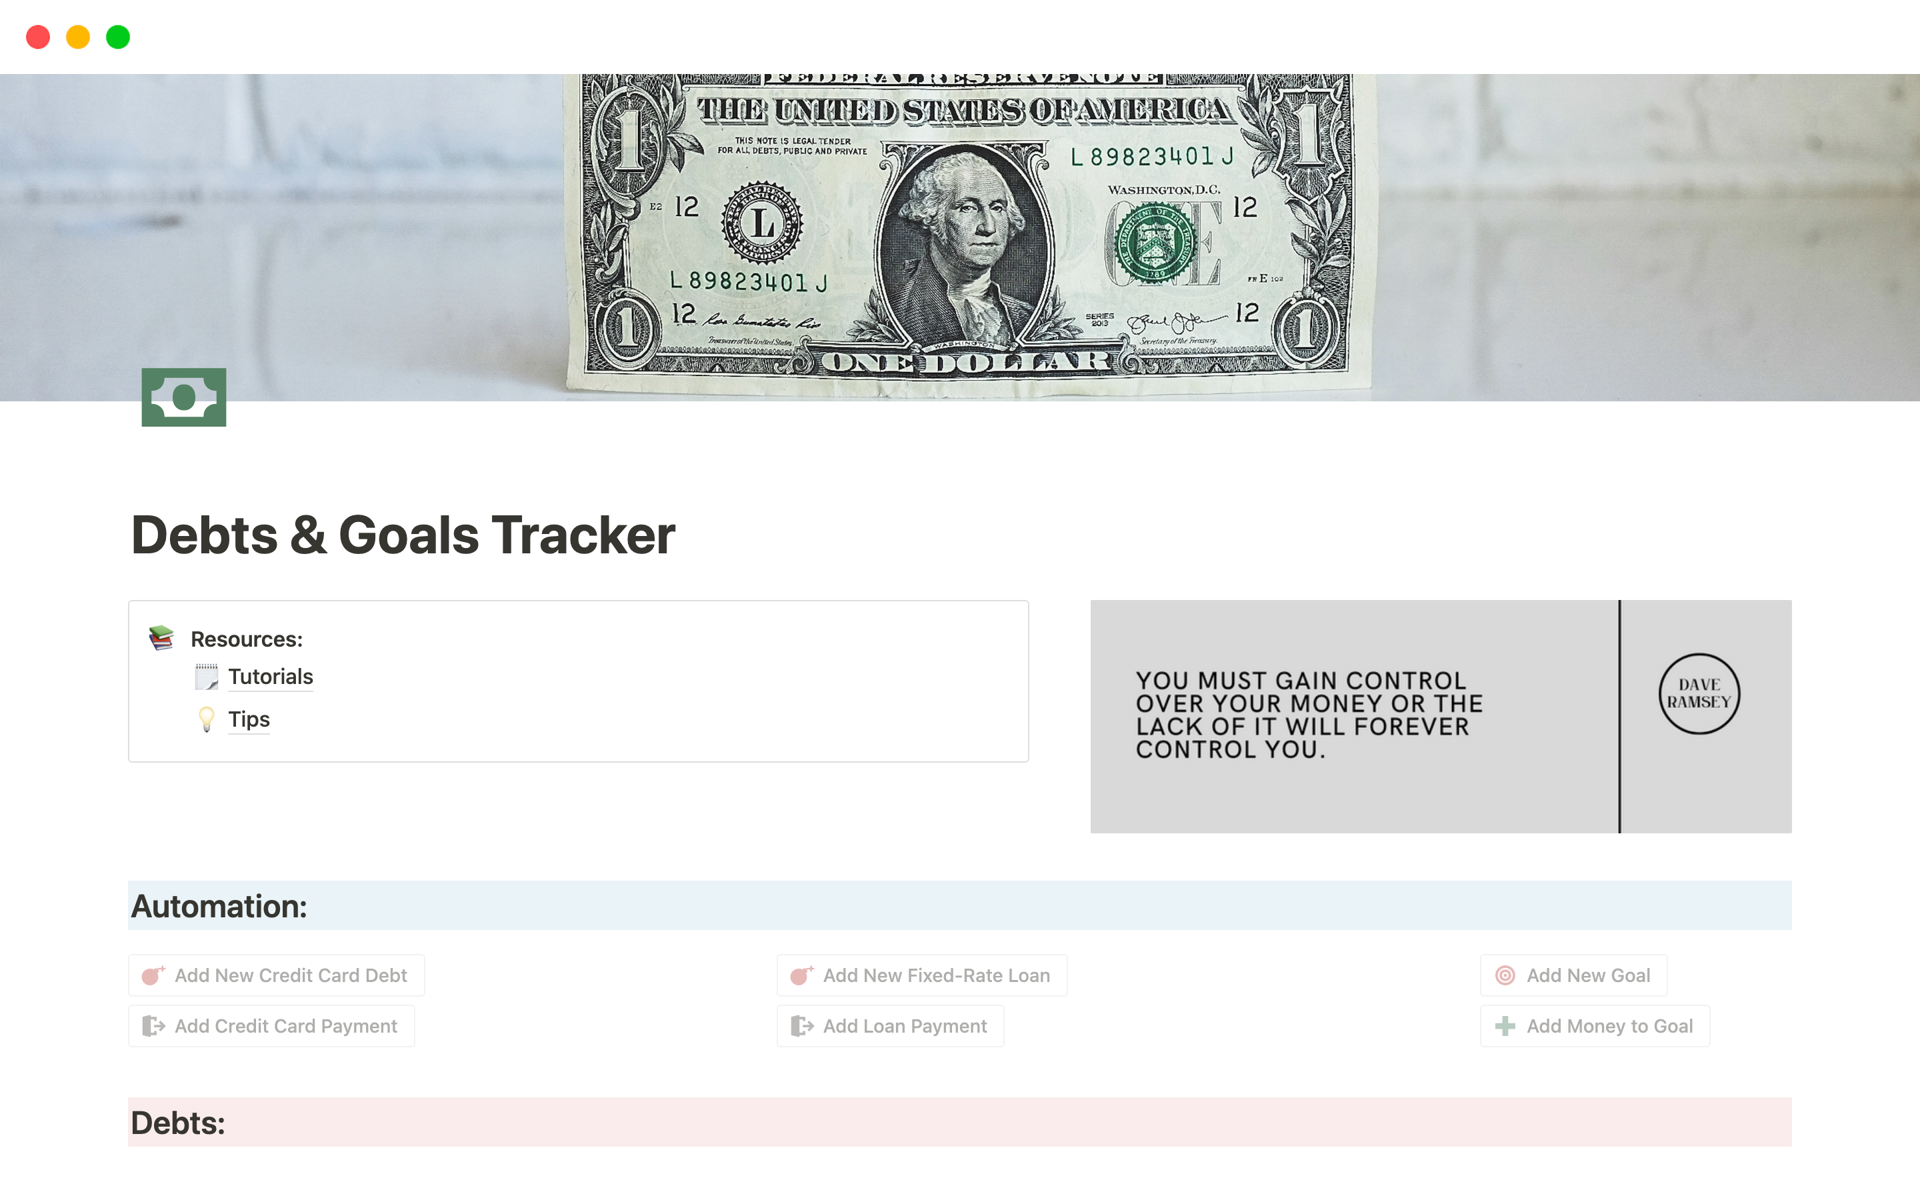 Track your progress on paying toward your debts and financial goals!